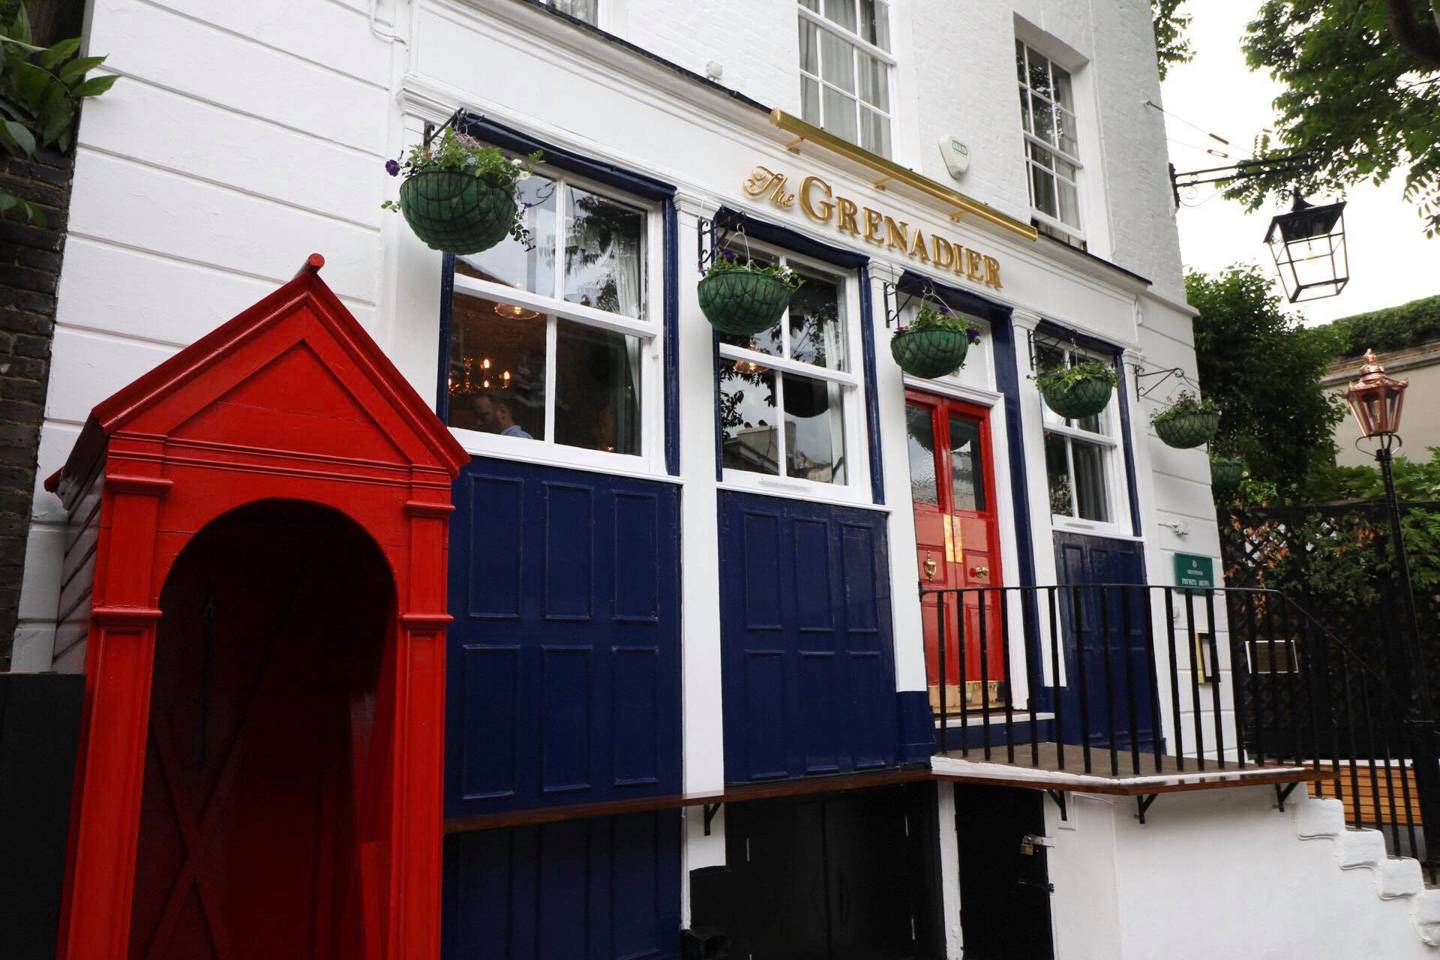 The Best London Pubs To Visit For Drinks, Food & Outdoor Dining | Tatler